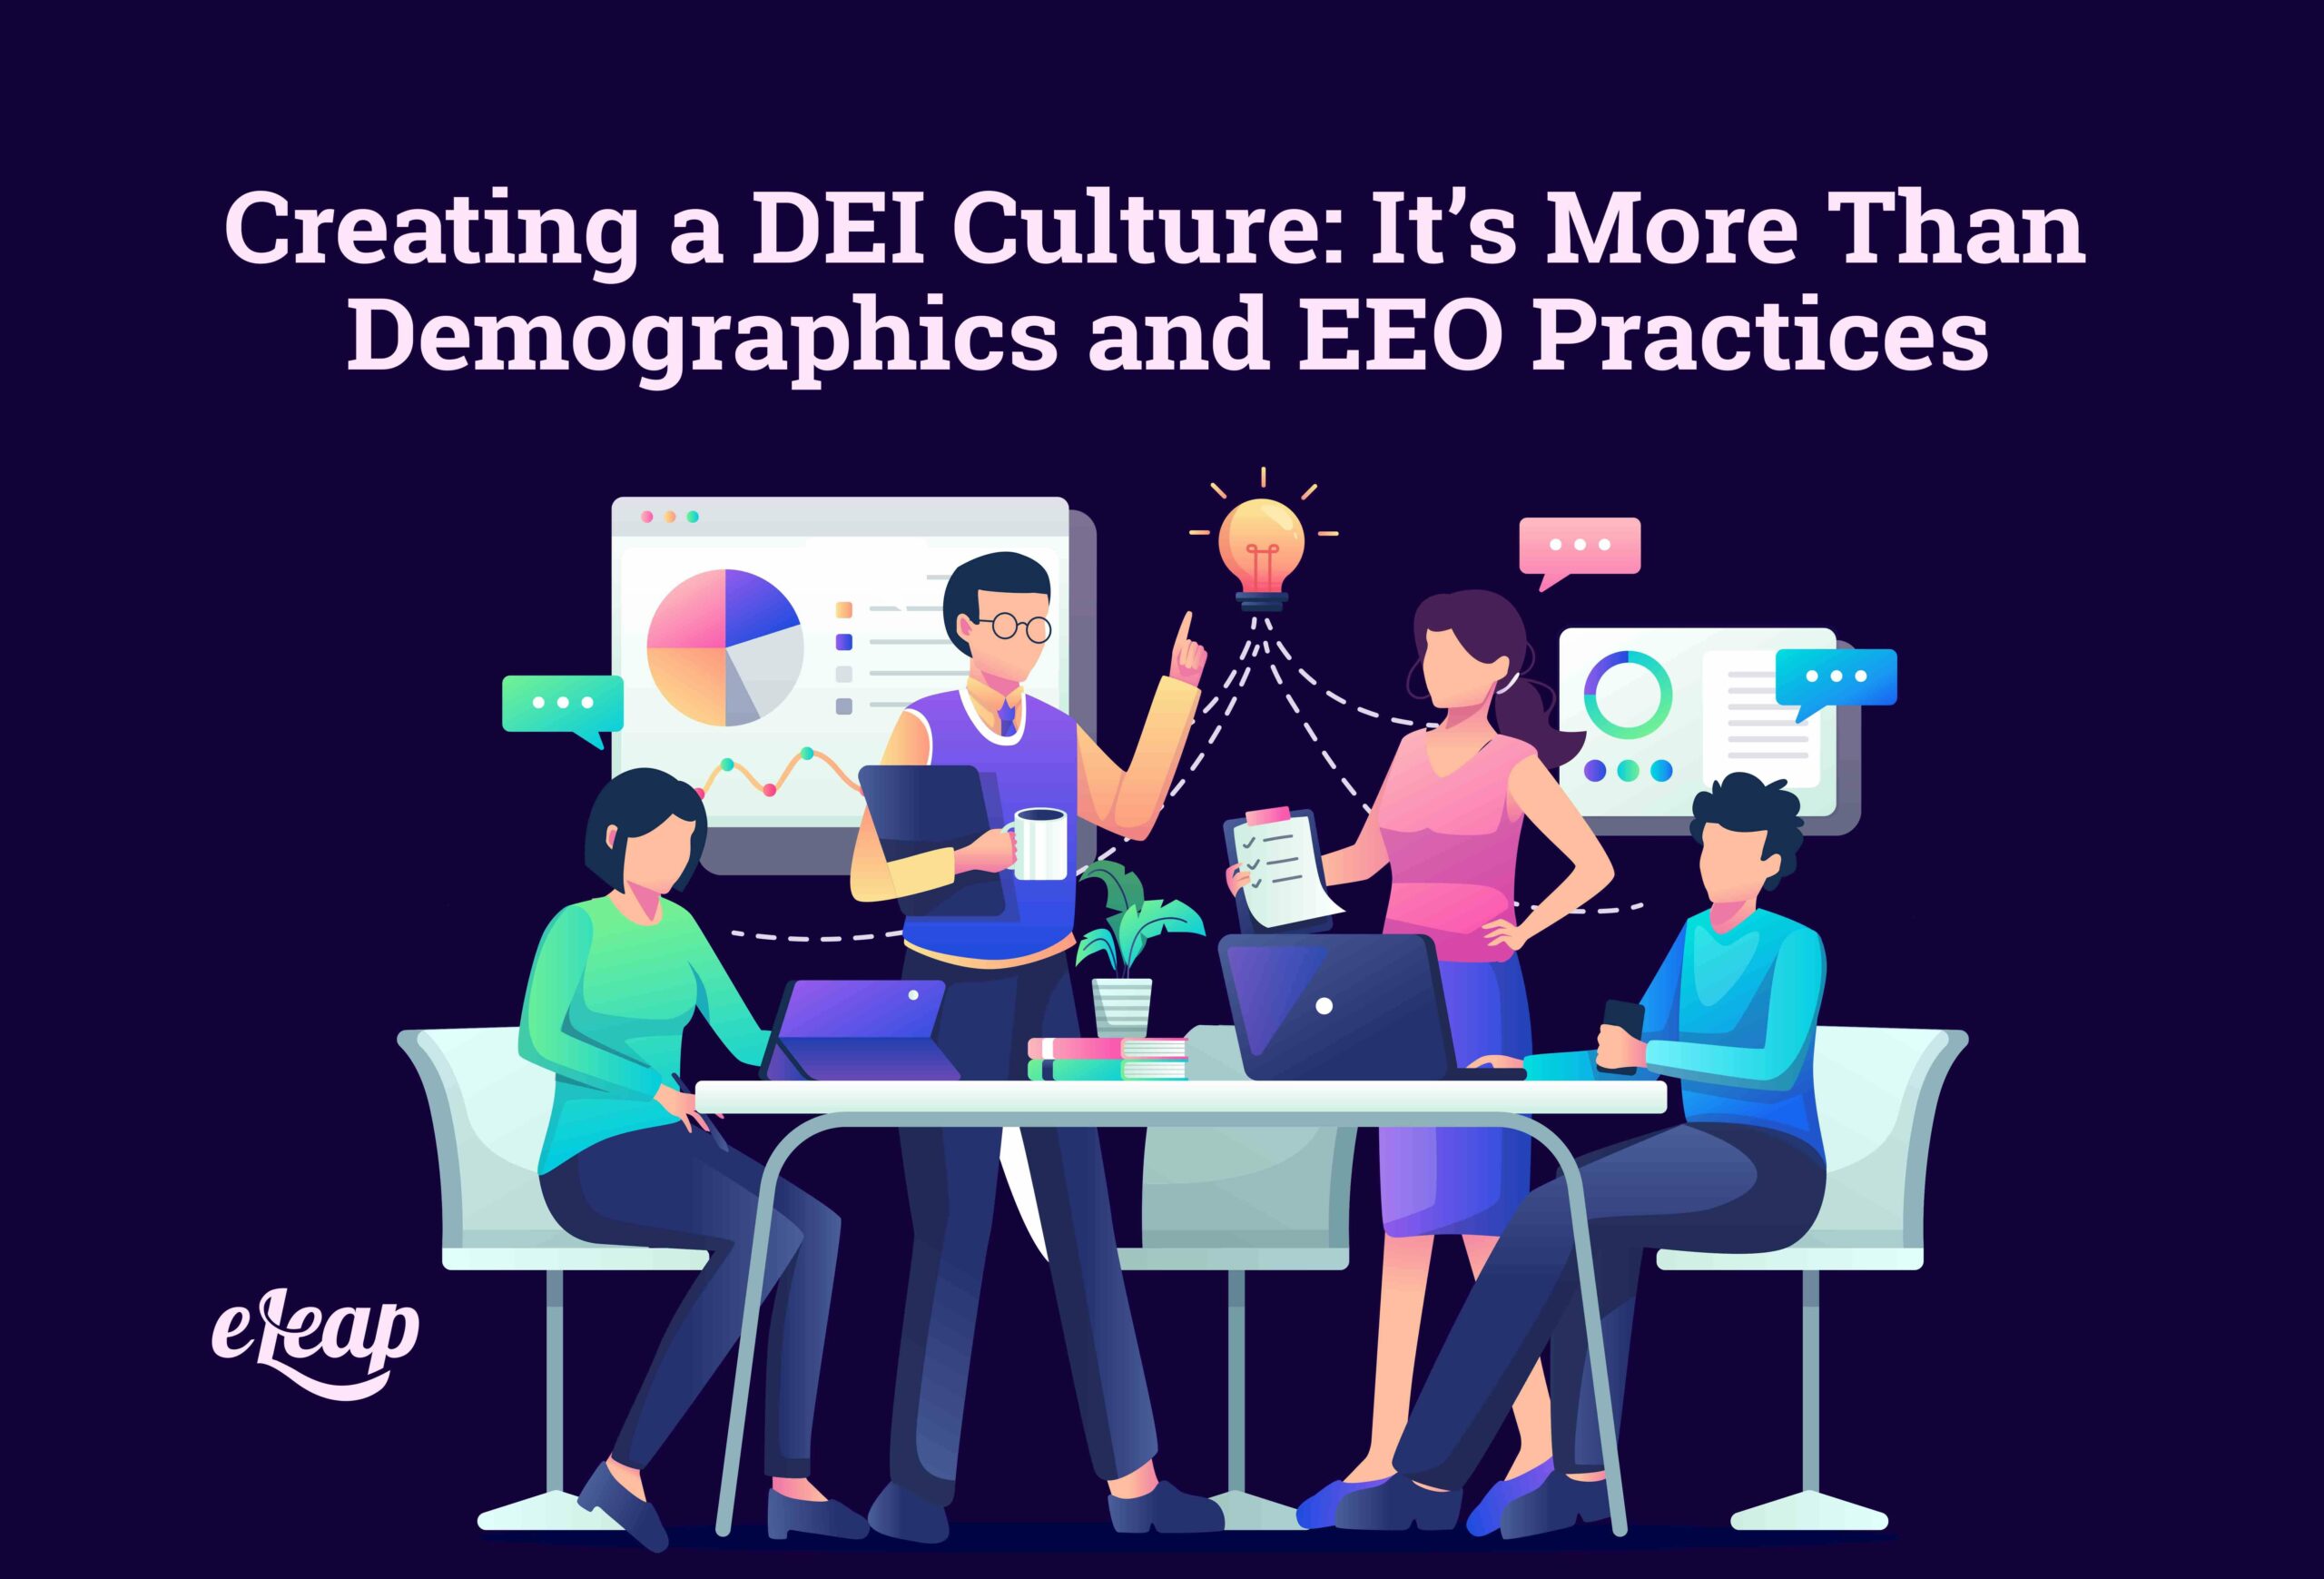 Creating a DEI Culture: It’s More Than Demographics and EEO Practices